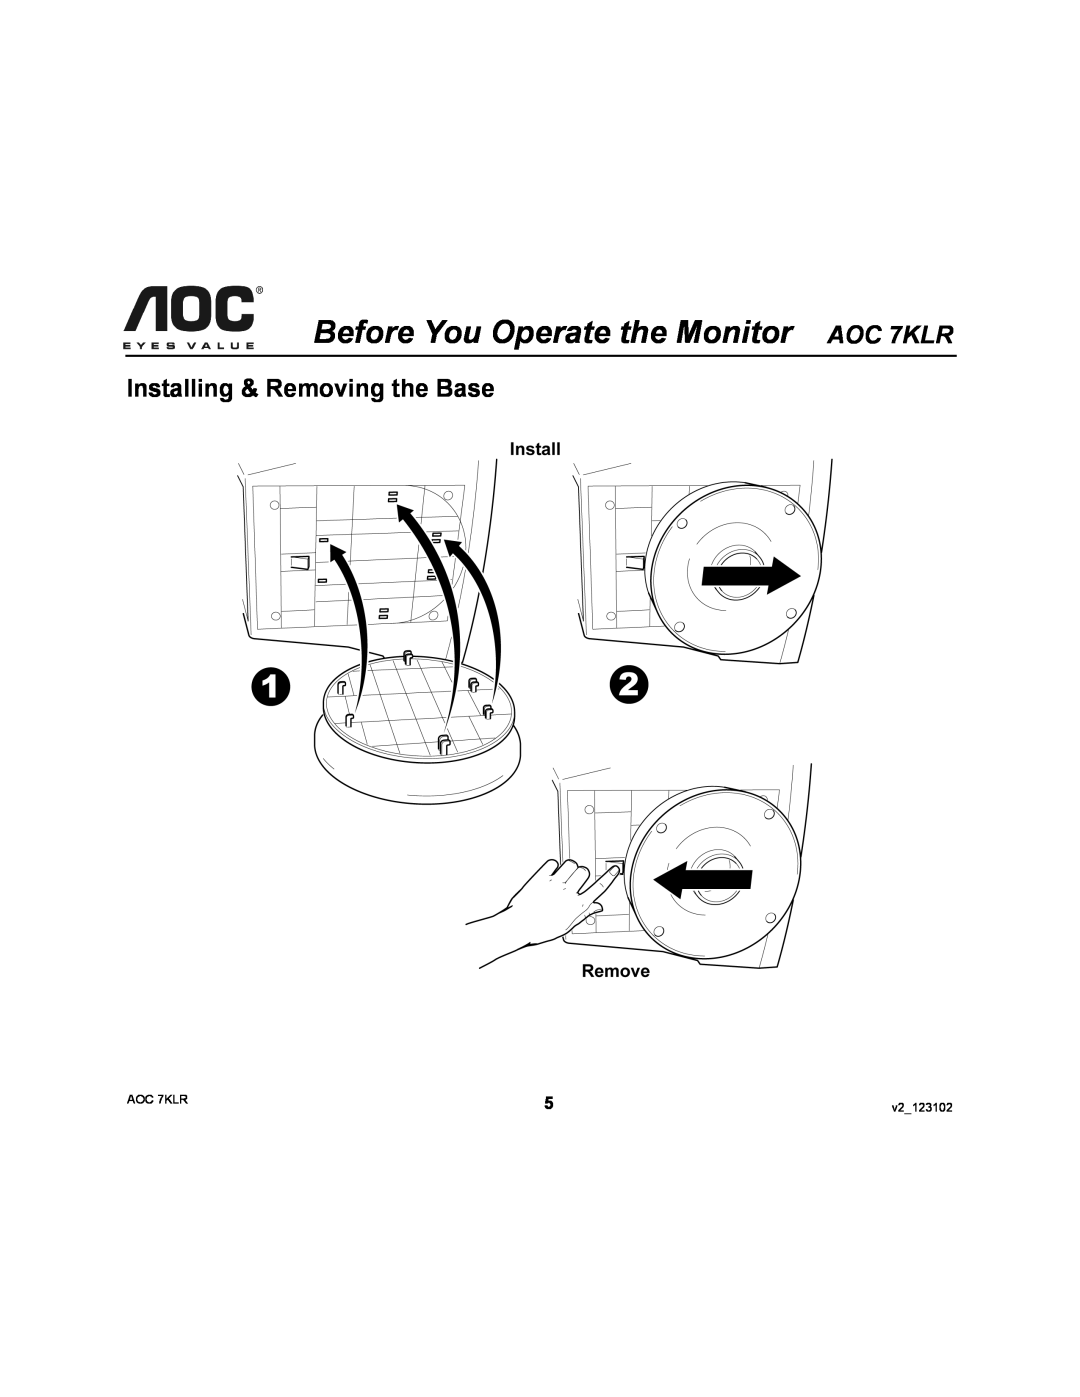 AOC user manual Before You Operate the Monitor AOC 7KLR, Installing & Removing the Base, v2123102 